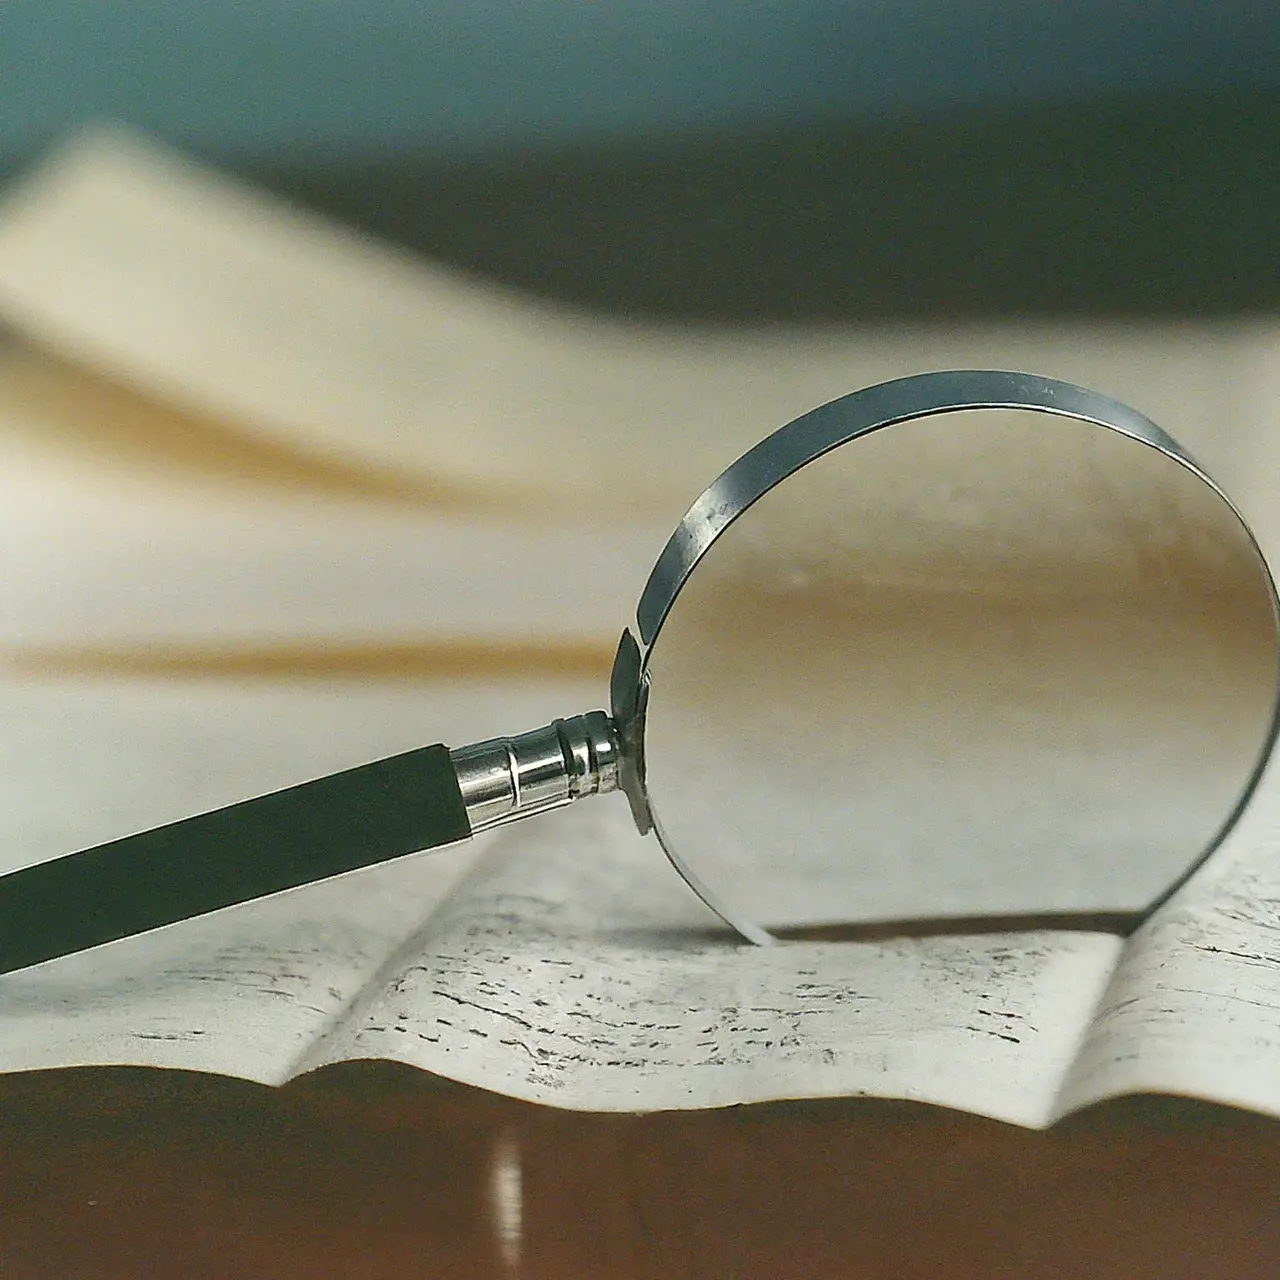 A close-up of a VTU transcript with a magnifying glass. 35mm stock photo